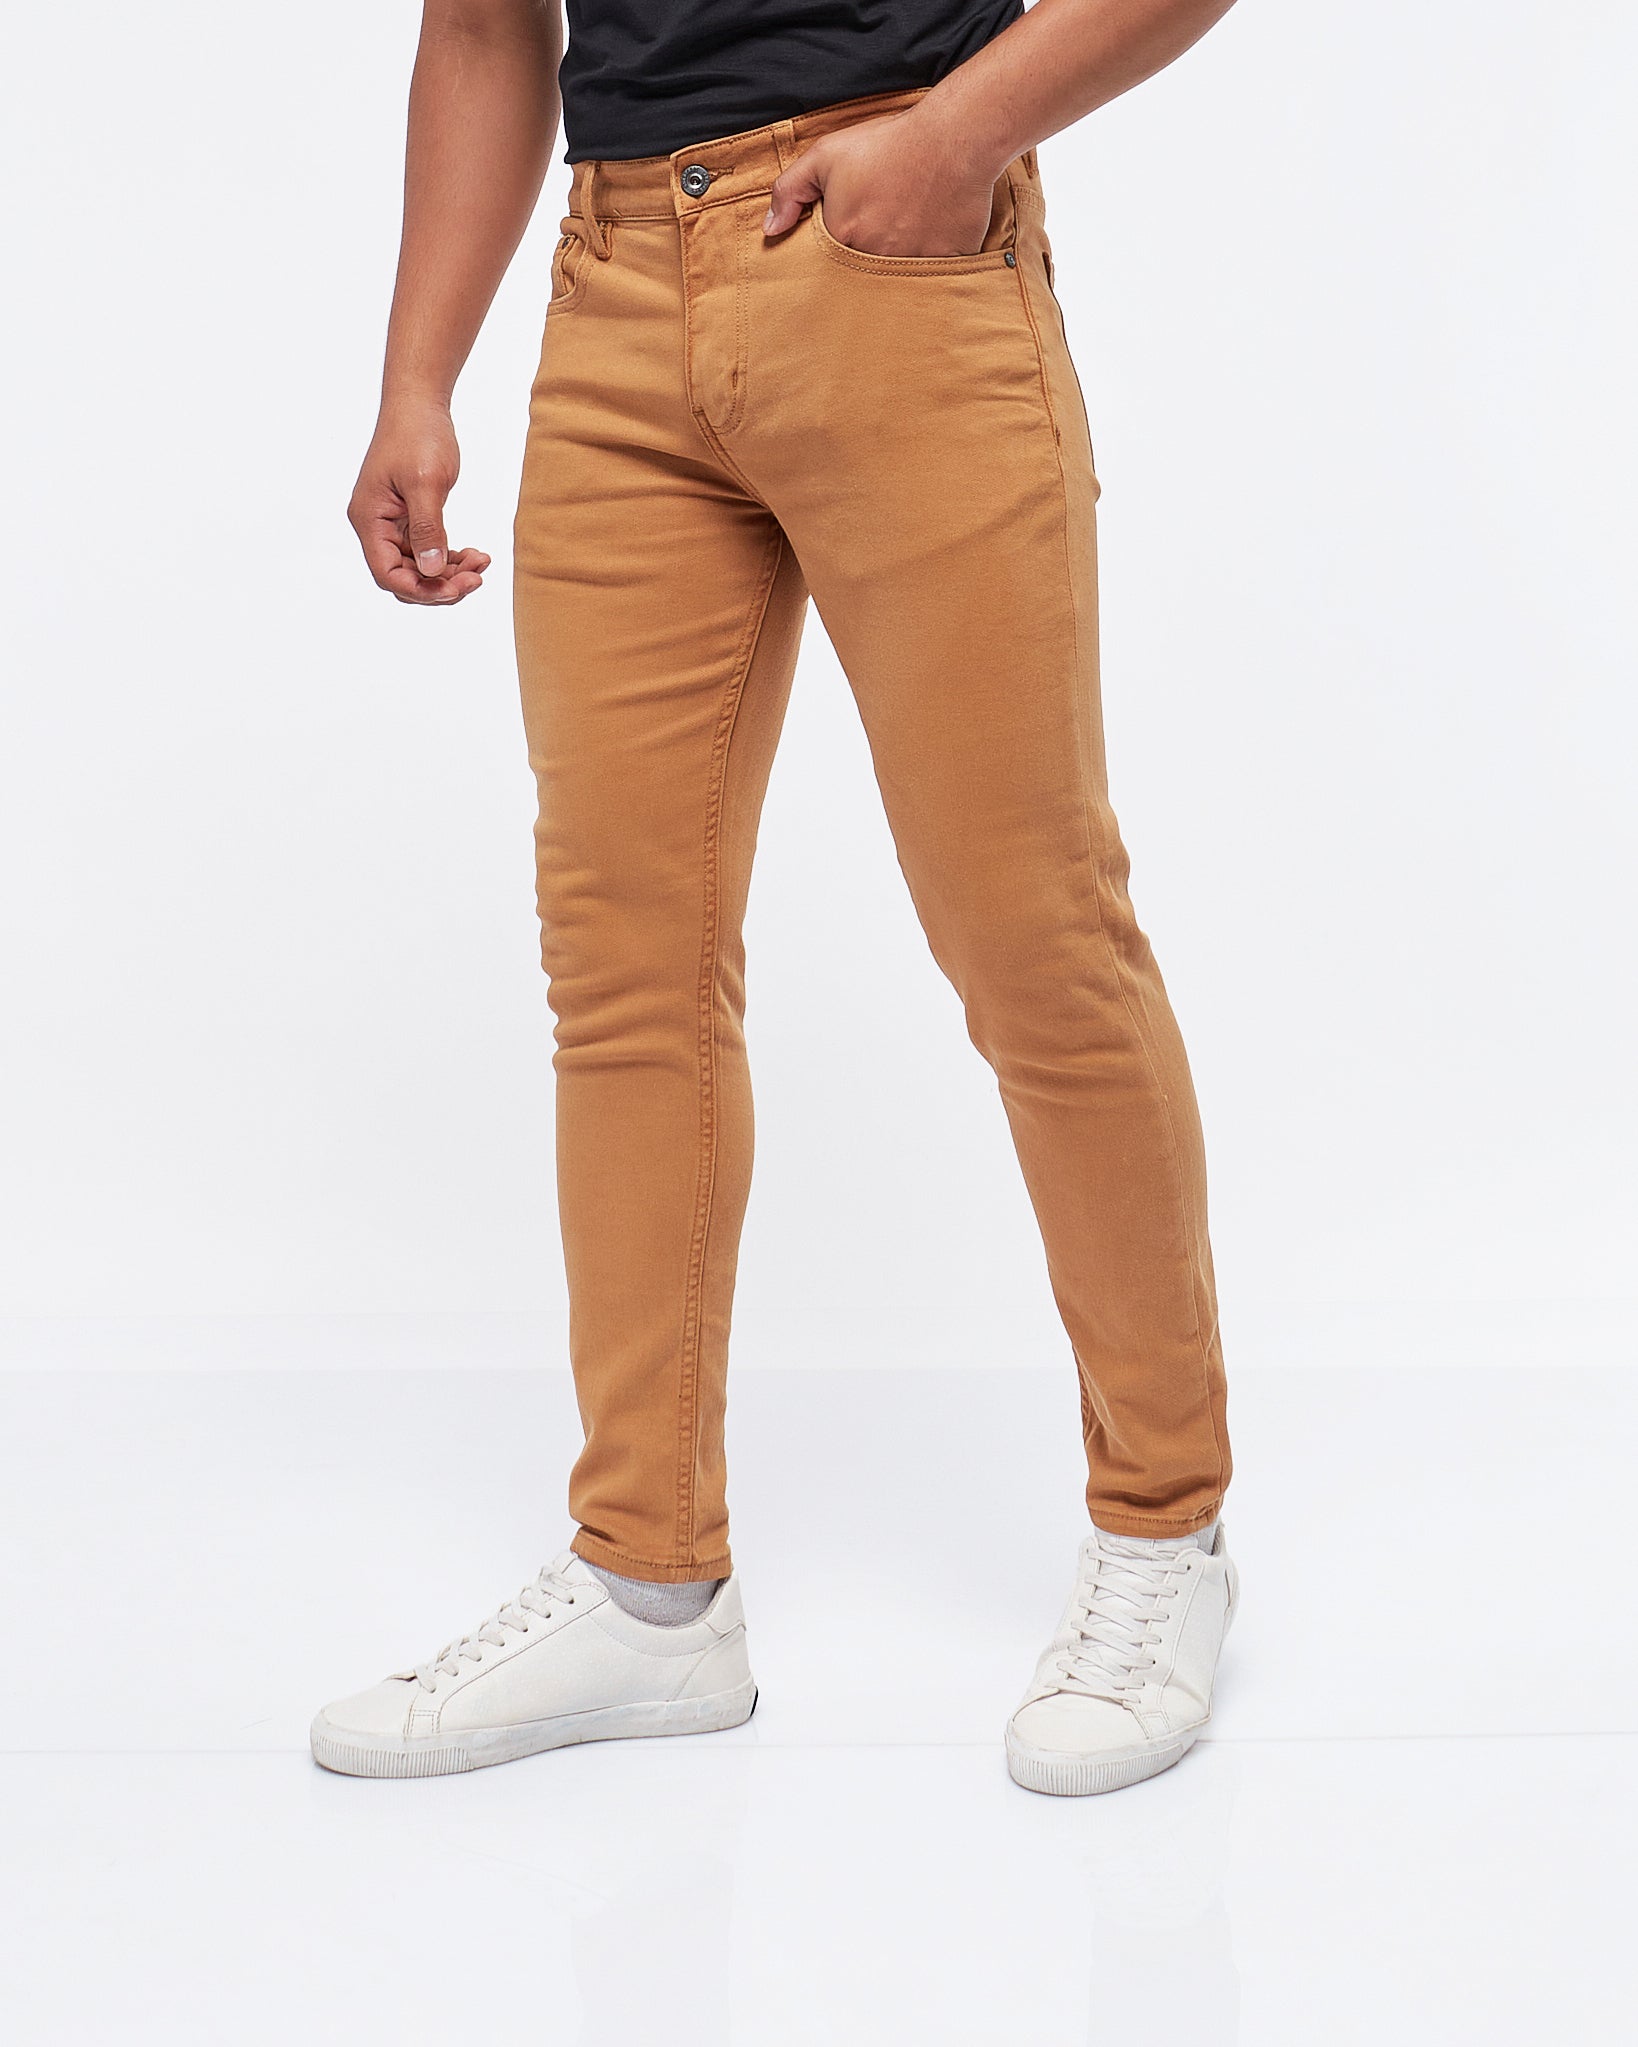 MOI OUTFIT-TB Logo Embroidered Back Pocket Men Jeans 25.90